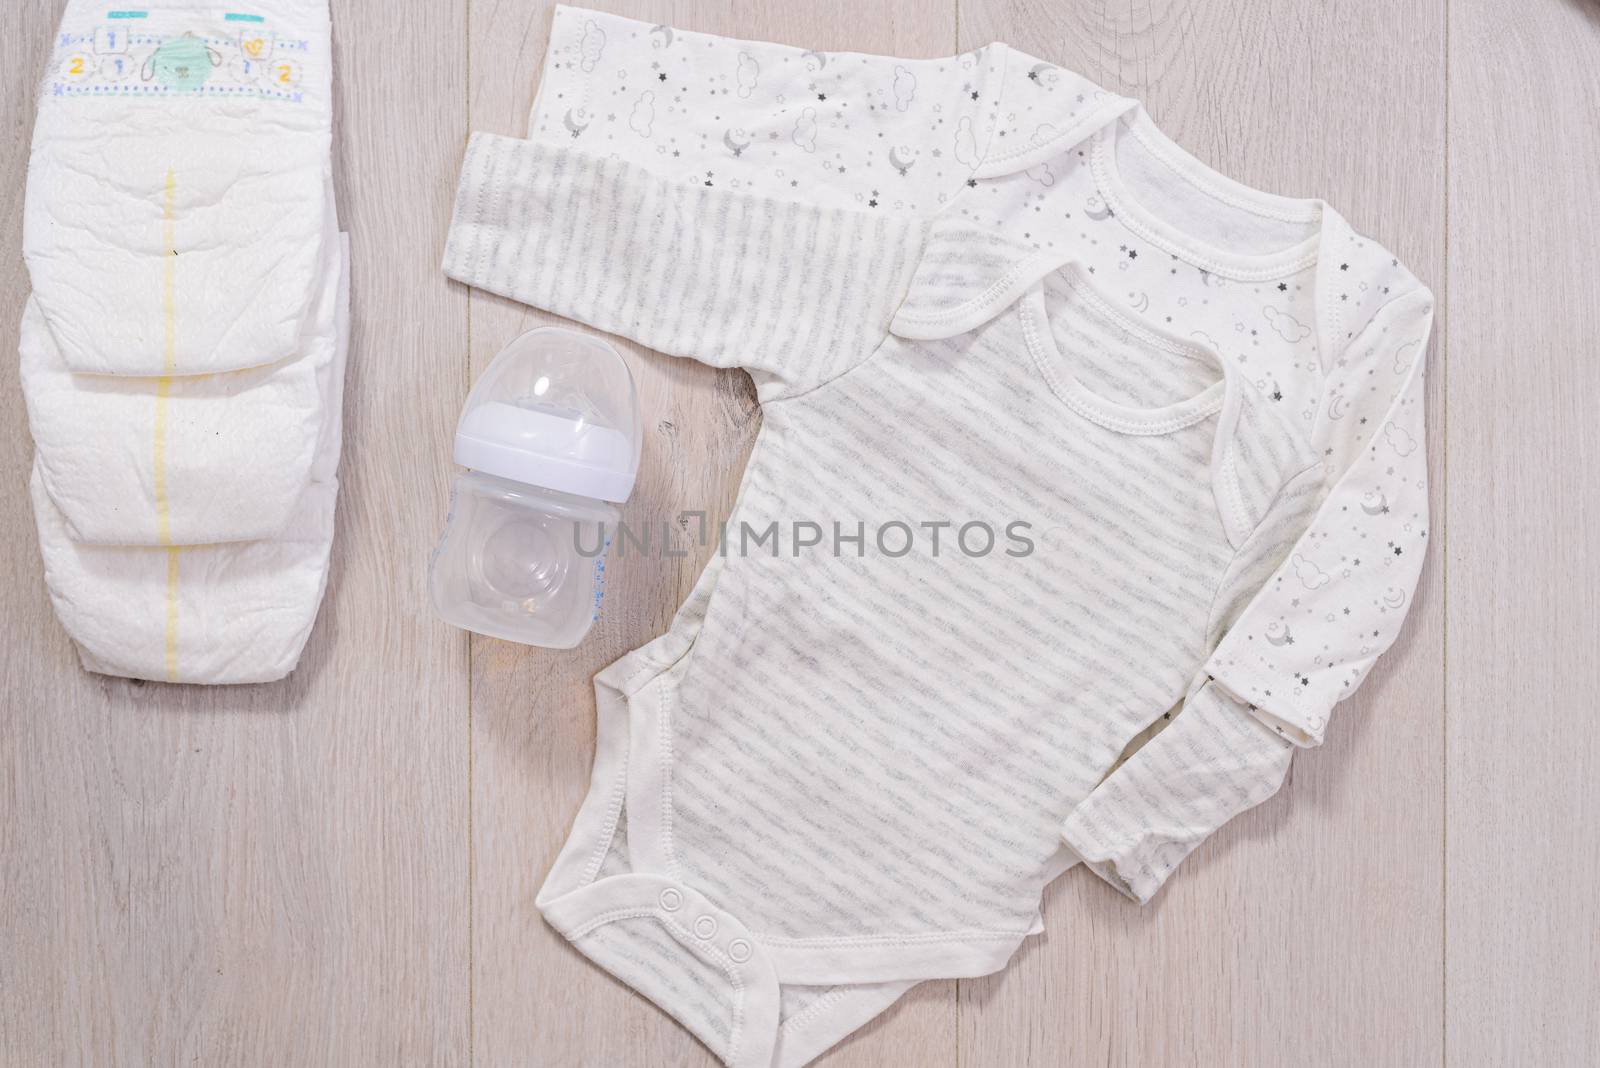 white baby clothes, diapers and baby milk bottle wooden background. newborn by jcdiazhidalgo